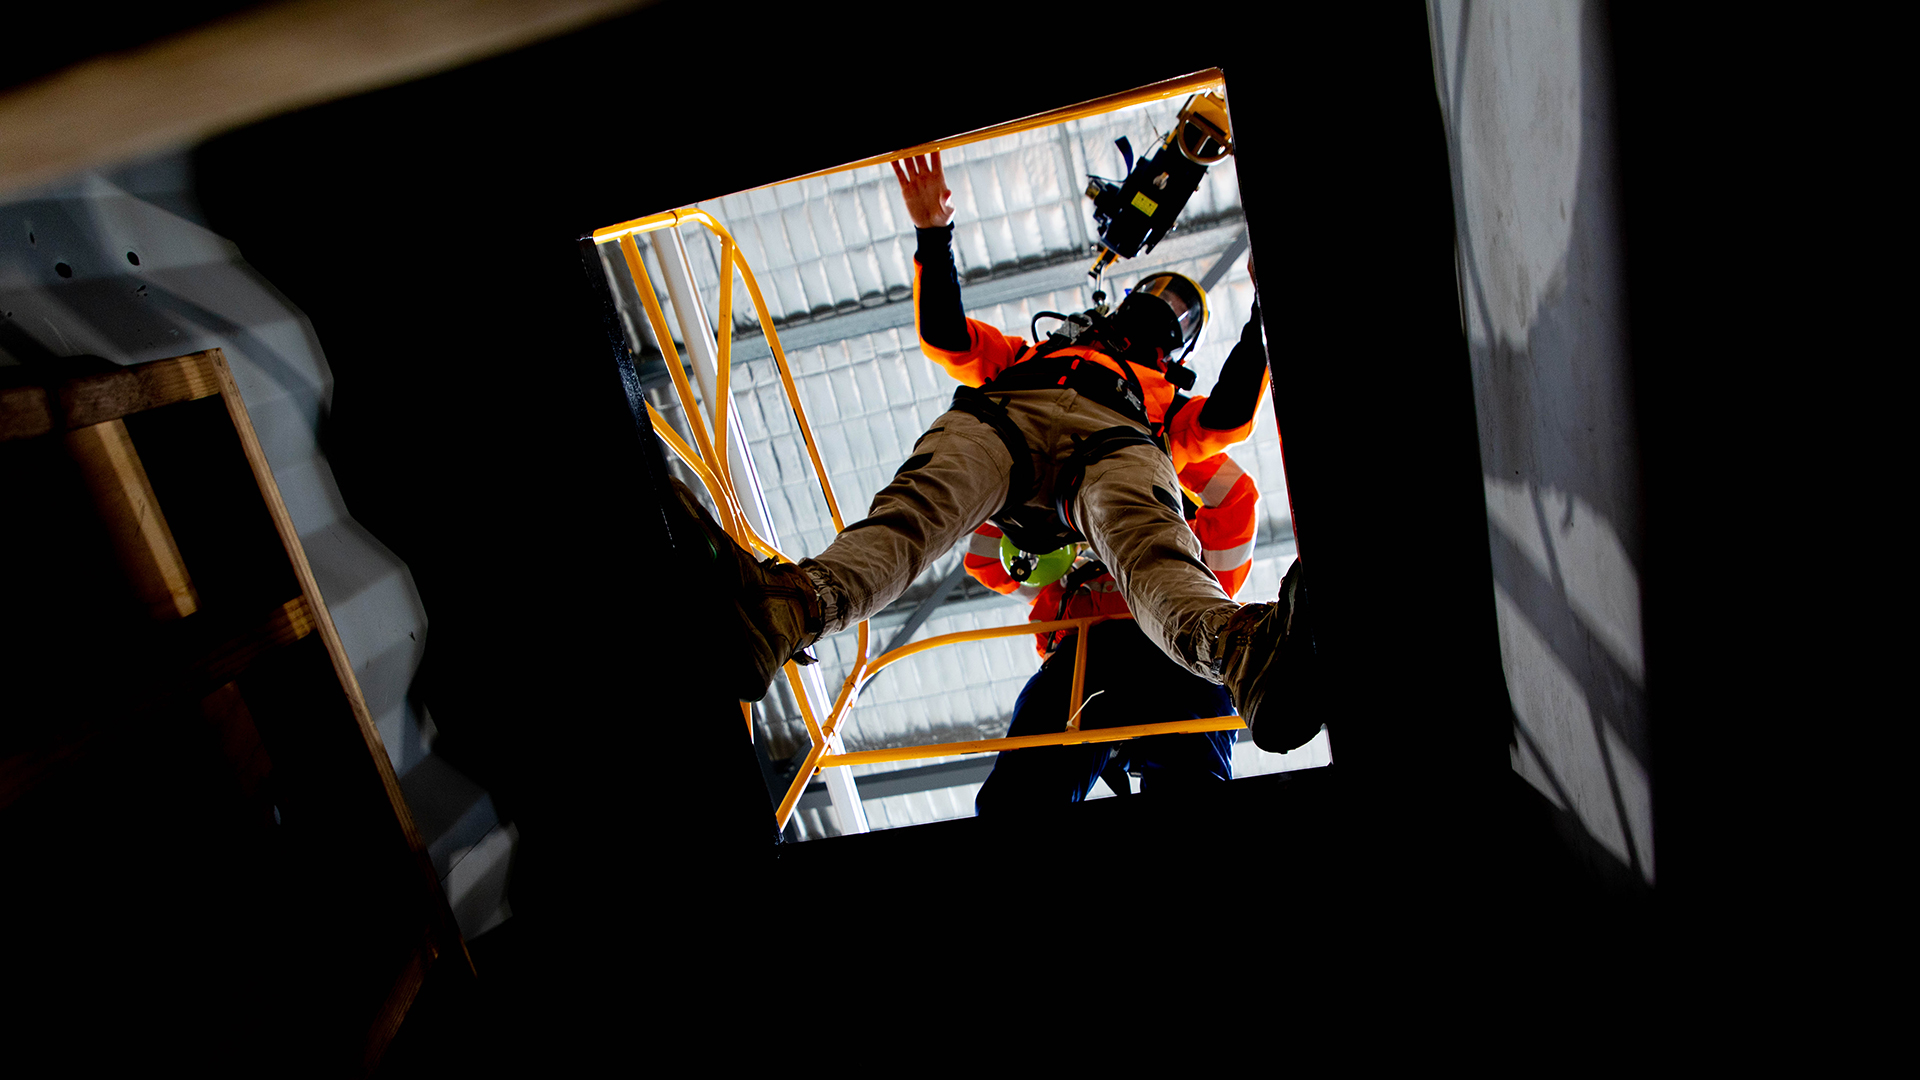 Participant wearing breathing apparatus entering a confined space.